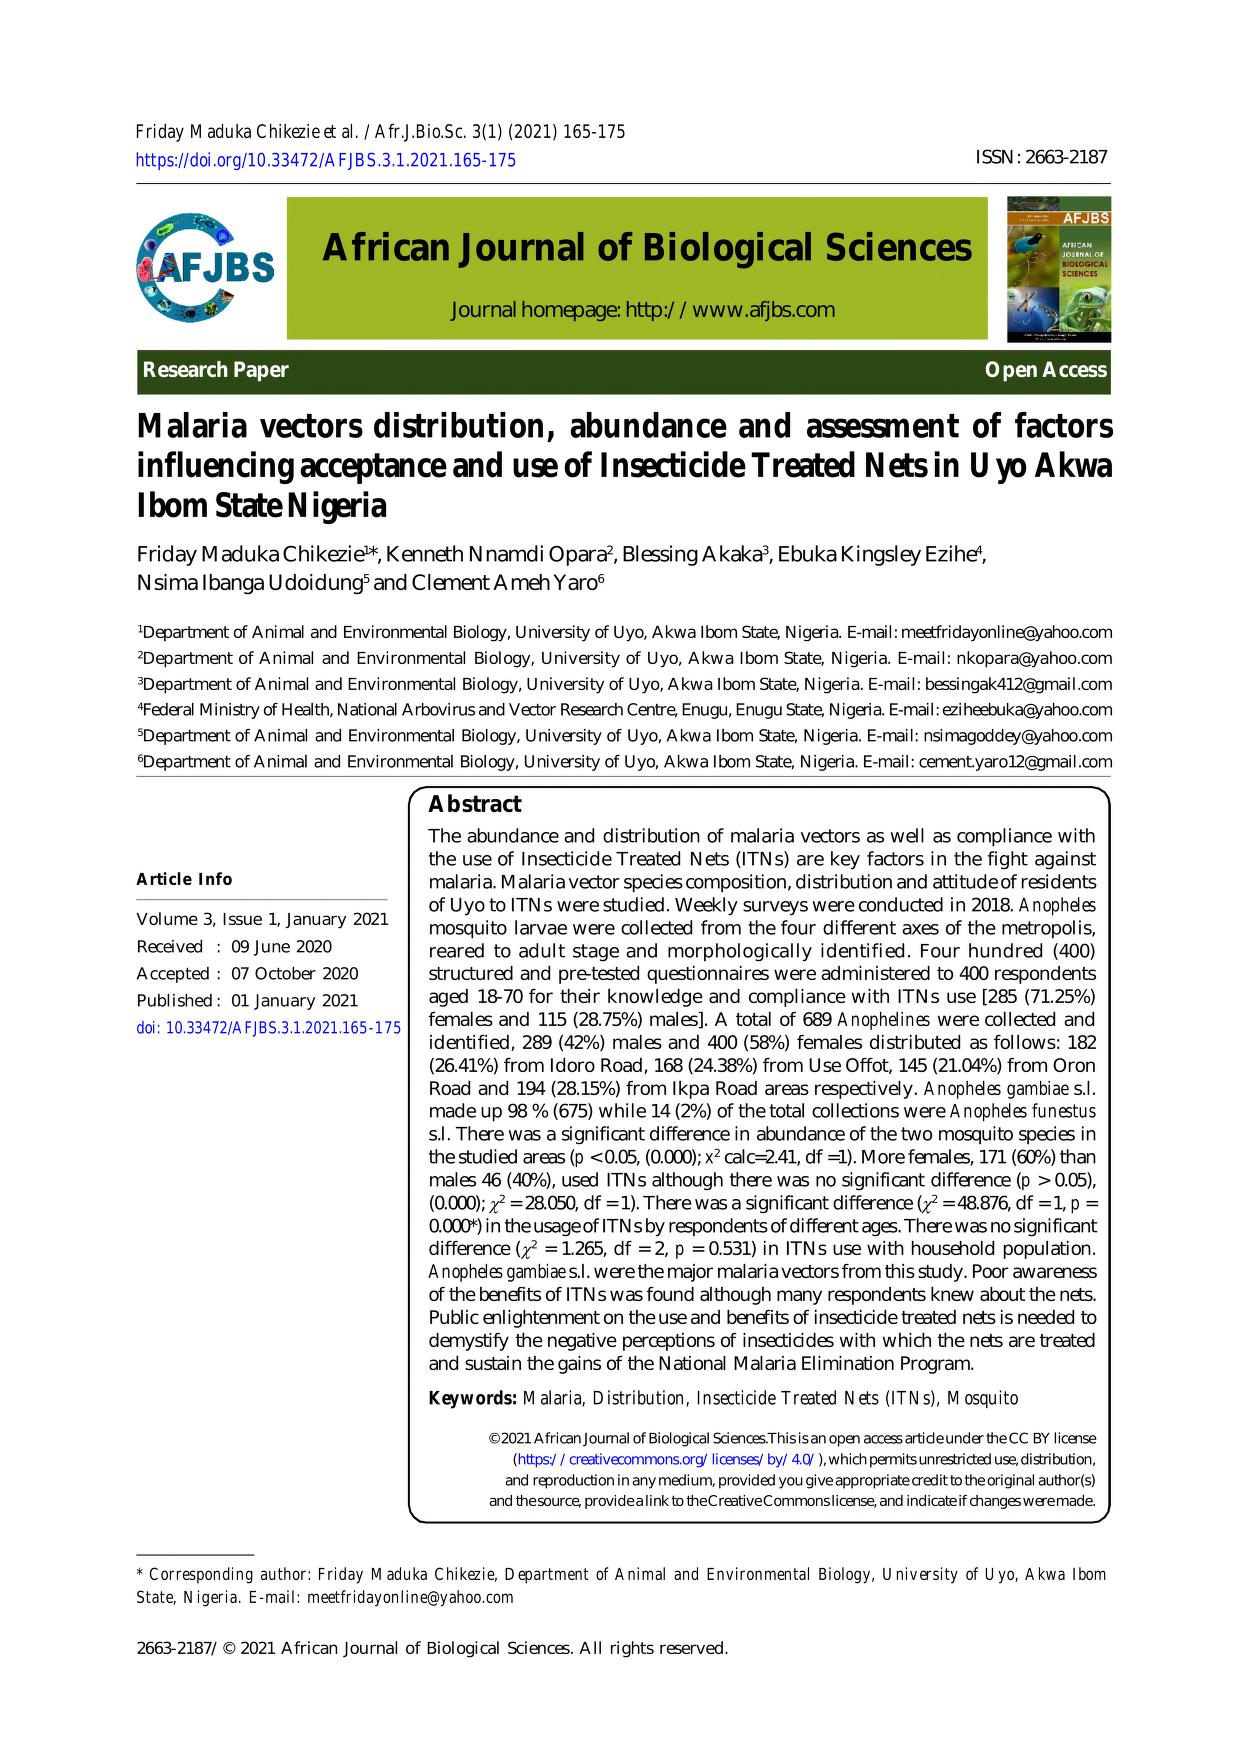 Malaria vectors distribution, abundance and assessment of factors  influencing acceptance and use of Insecticide Treated Nets in Uyo Akwa Ibom  State Nigeria : African Journal of Biological Sciences : Free Download,  Borrow,